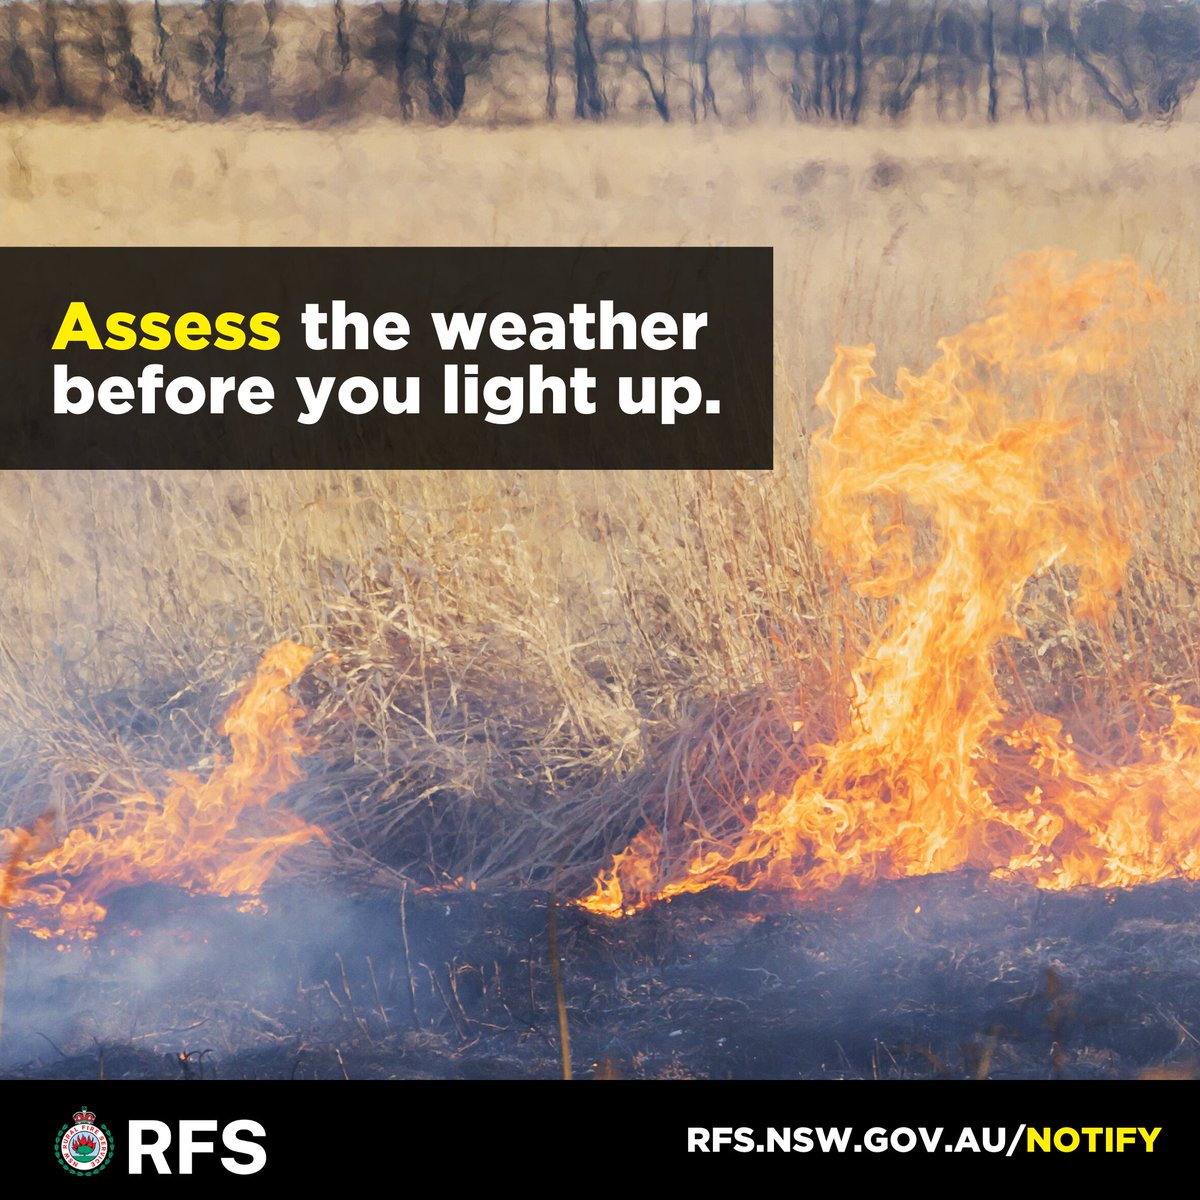 Over the coming days, parts of the state will see an increased fire risk as the dry and windy conditions continue. If you are planning on conducting a pile burn, do so responsibly and follow the safe burning guidelines. For more information visit rfs.nsw.gov.au/safeburning